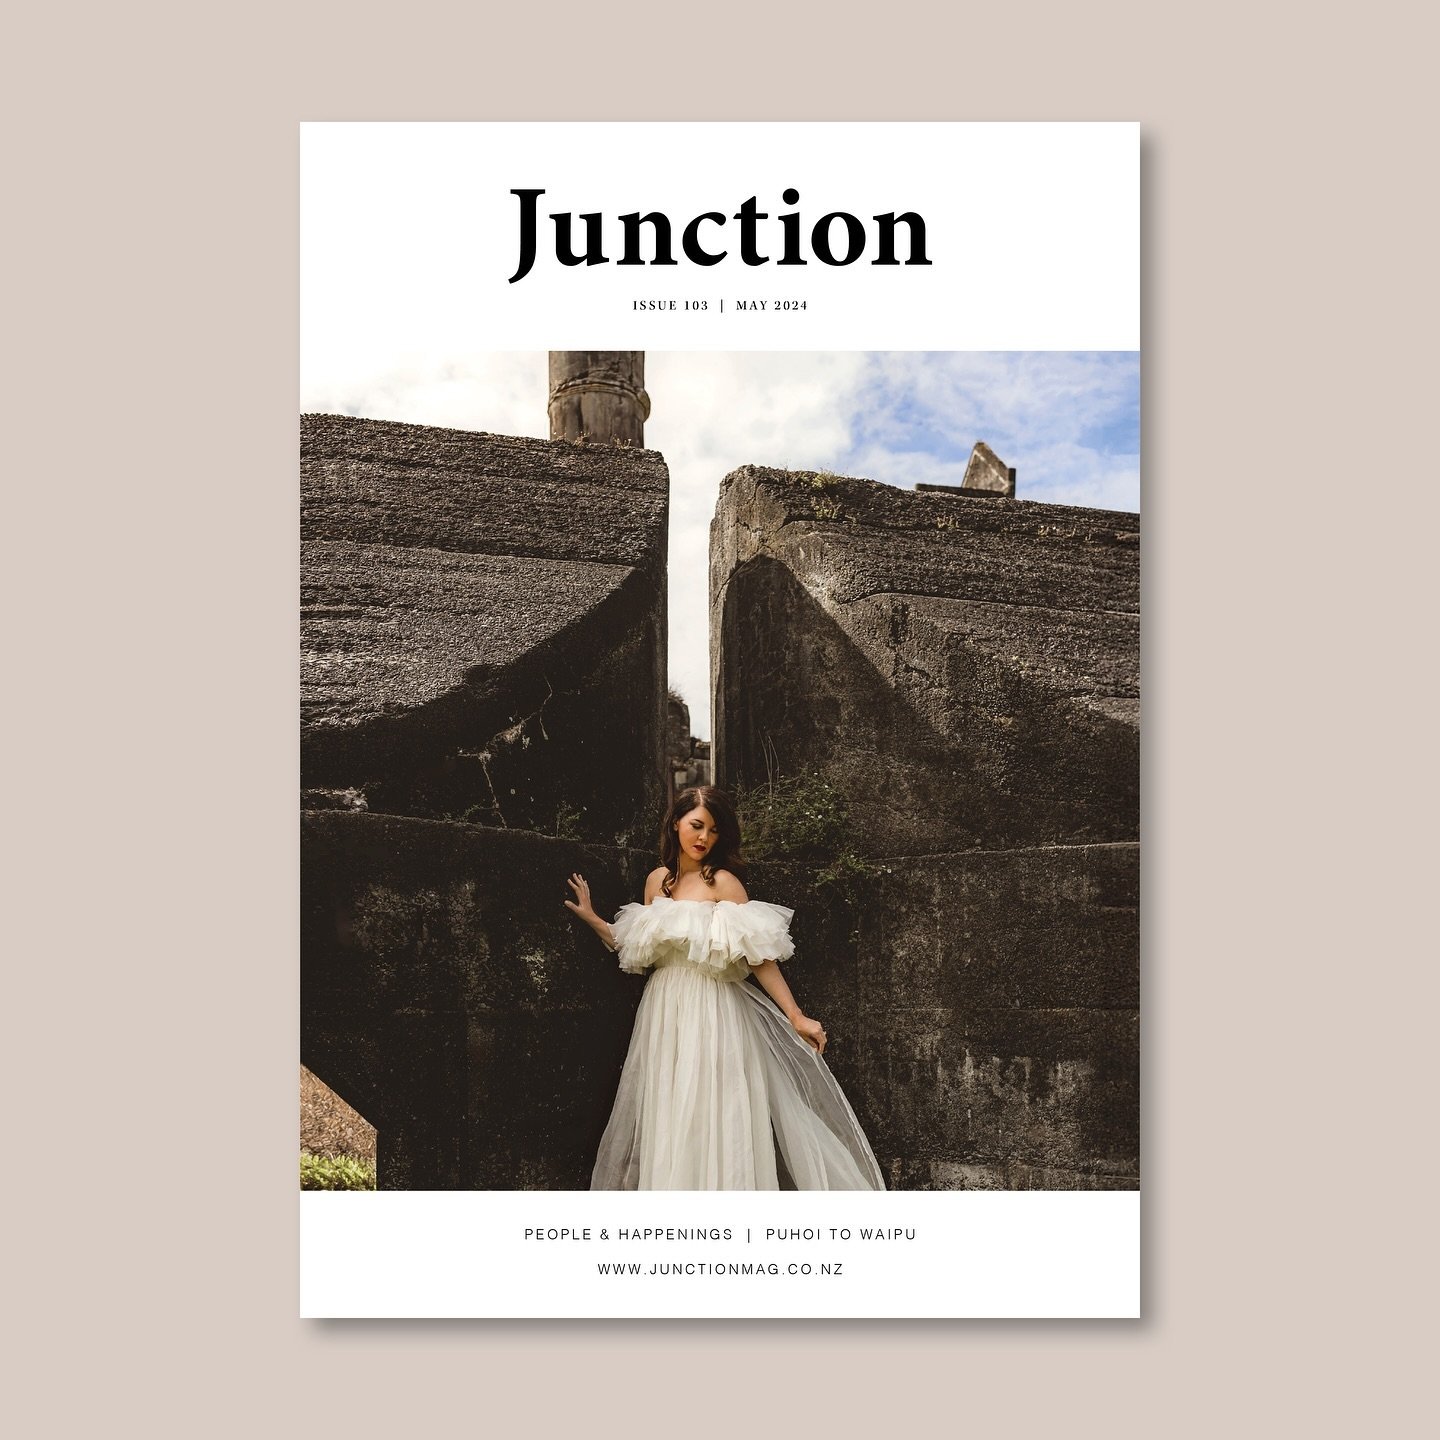 Introducing the latest edition of Junction Magazine! This month, we&rsquo;re diving into bridal inspiration alongside captivating shoots and editorials.

Read the digital version online via the link in our bio, or pick up a copy from your nearest Jun